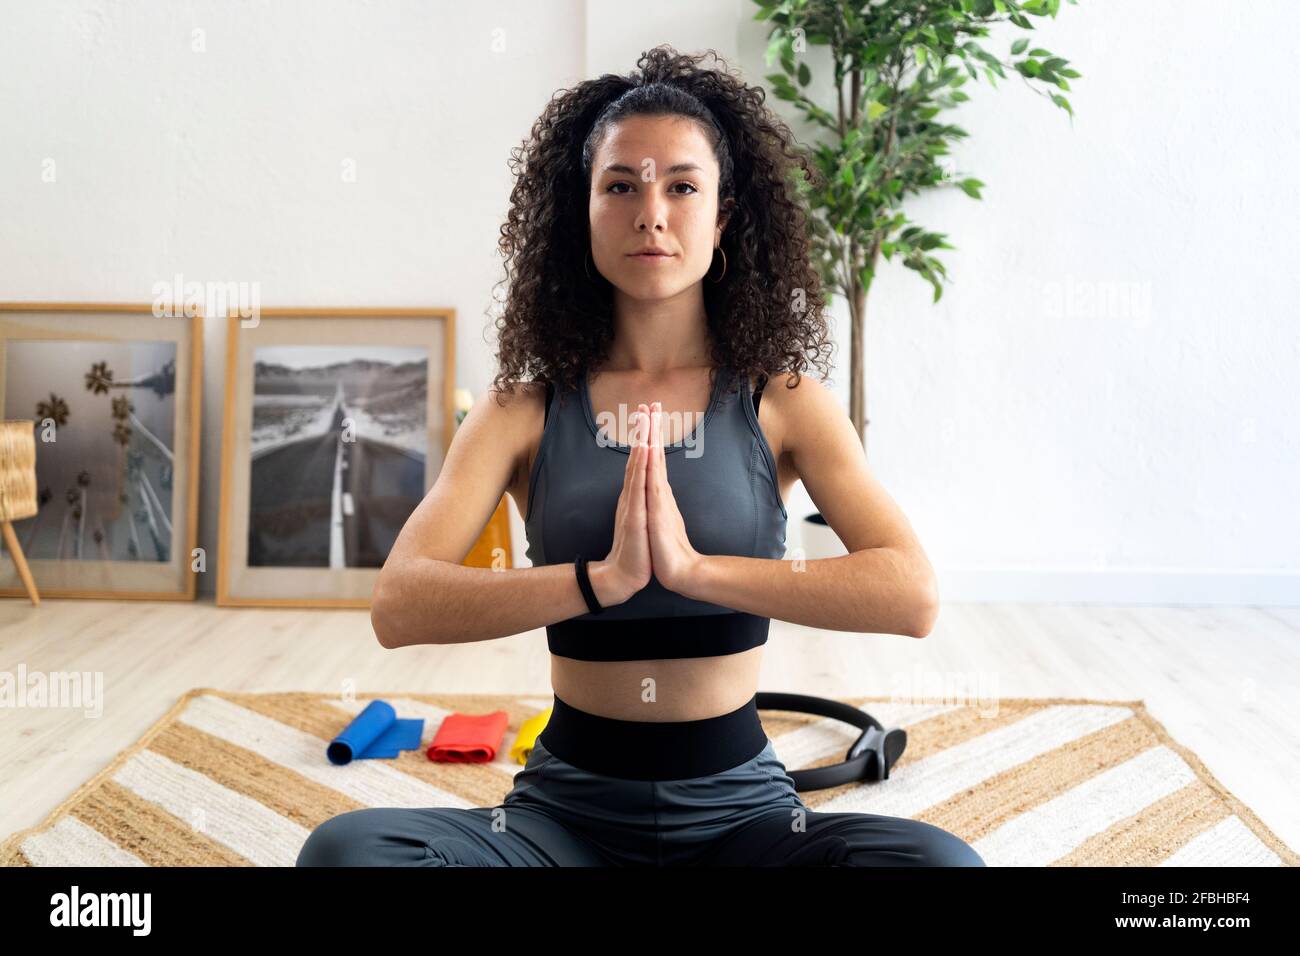 Curly haired woman with hands clasped doing relaxation exercise at home Stock Photo